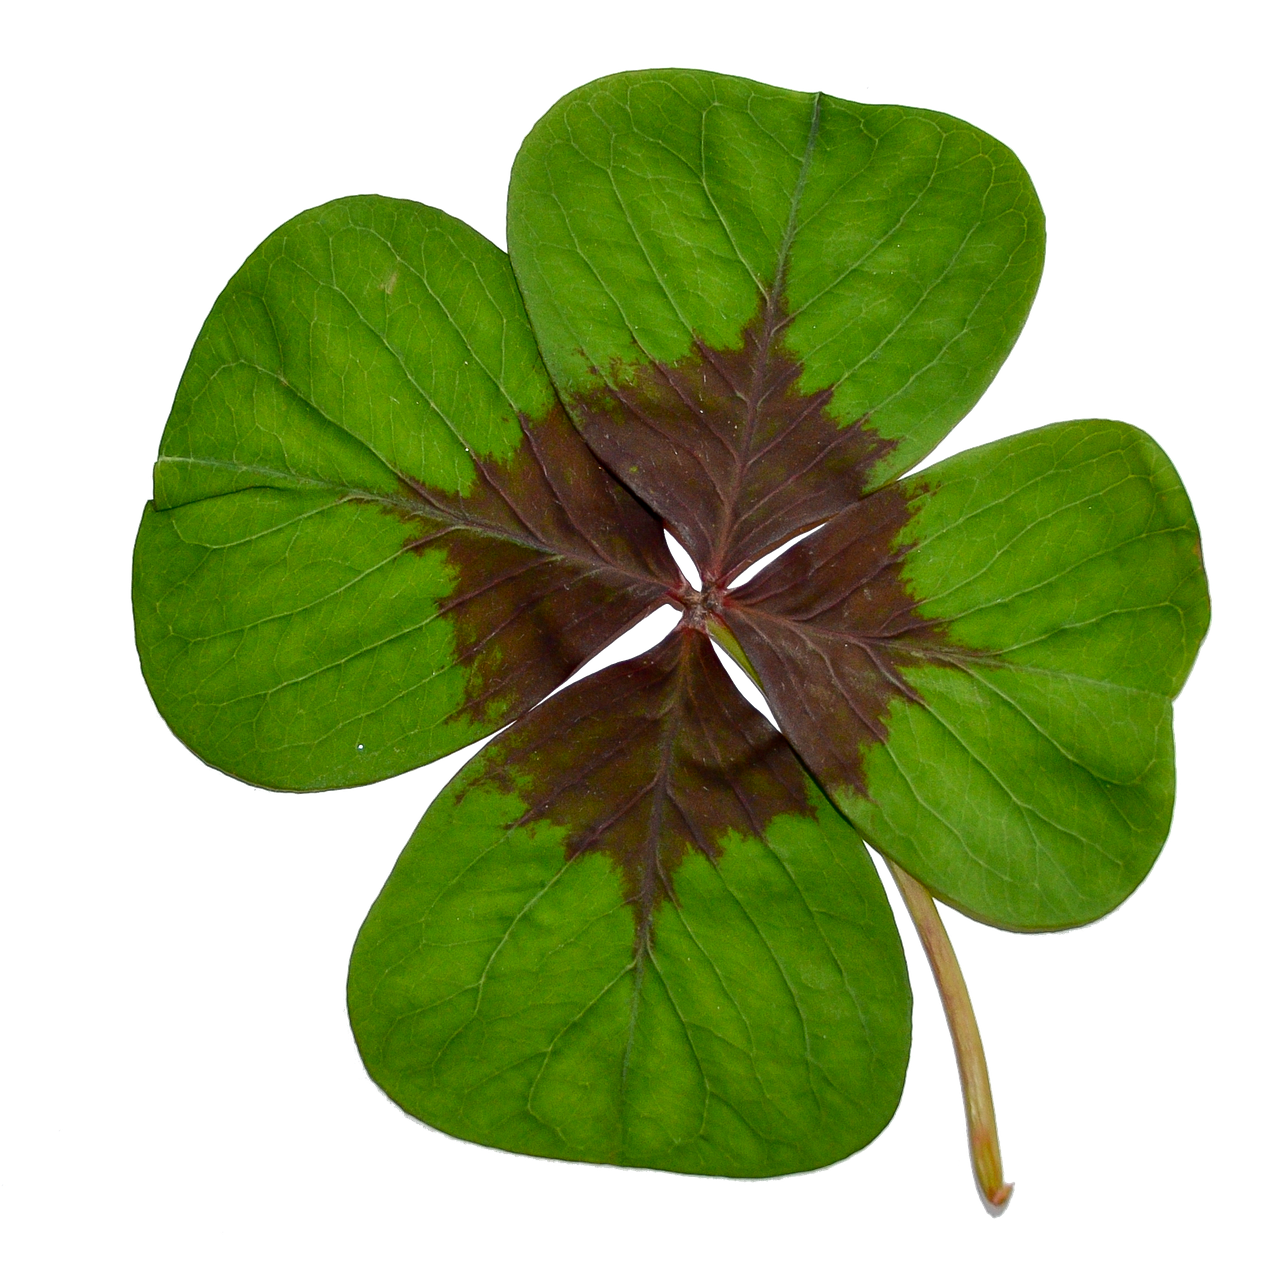 A Four Leaf Clover With A Brown Spot On It